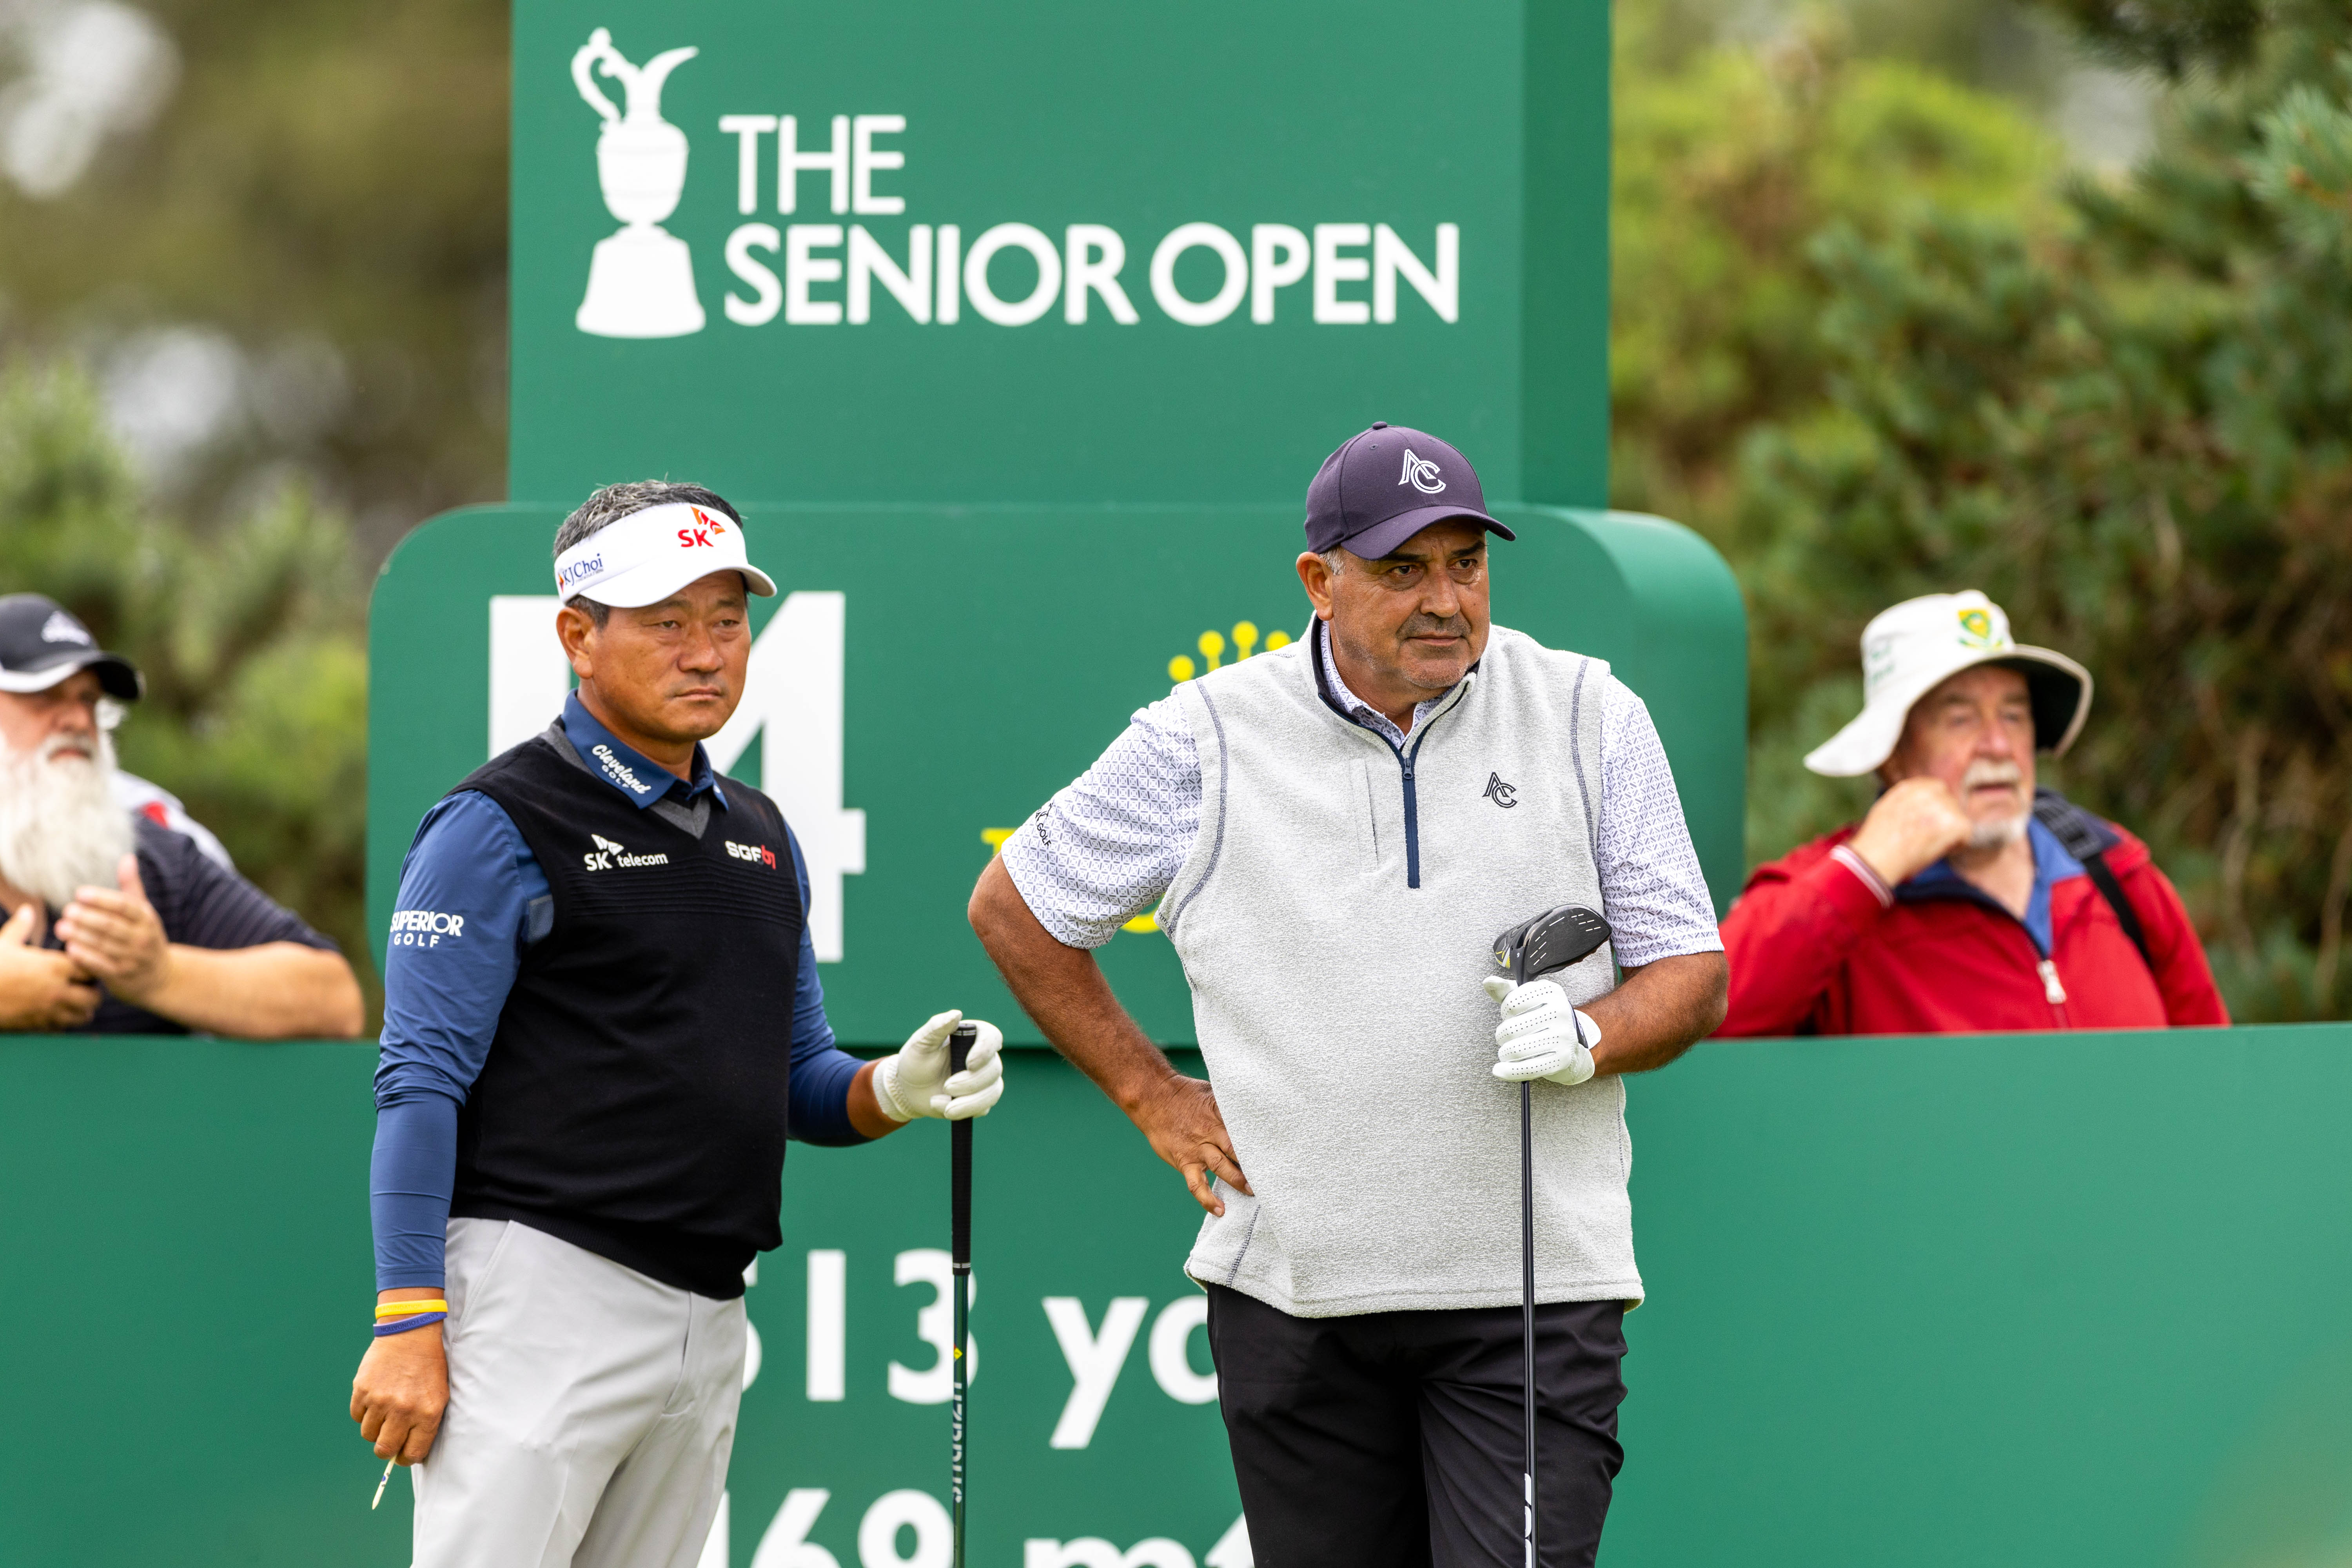 KJ Choi leads Senior British Open, Angel Cabrera is five shots back after 36 holes at Carnoustie